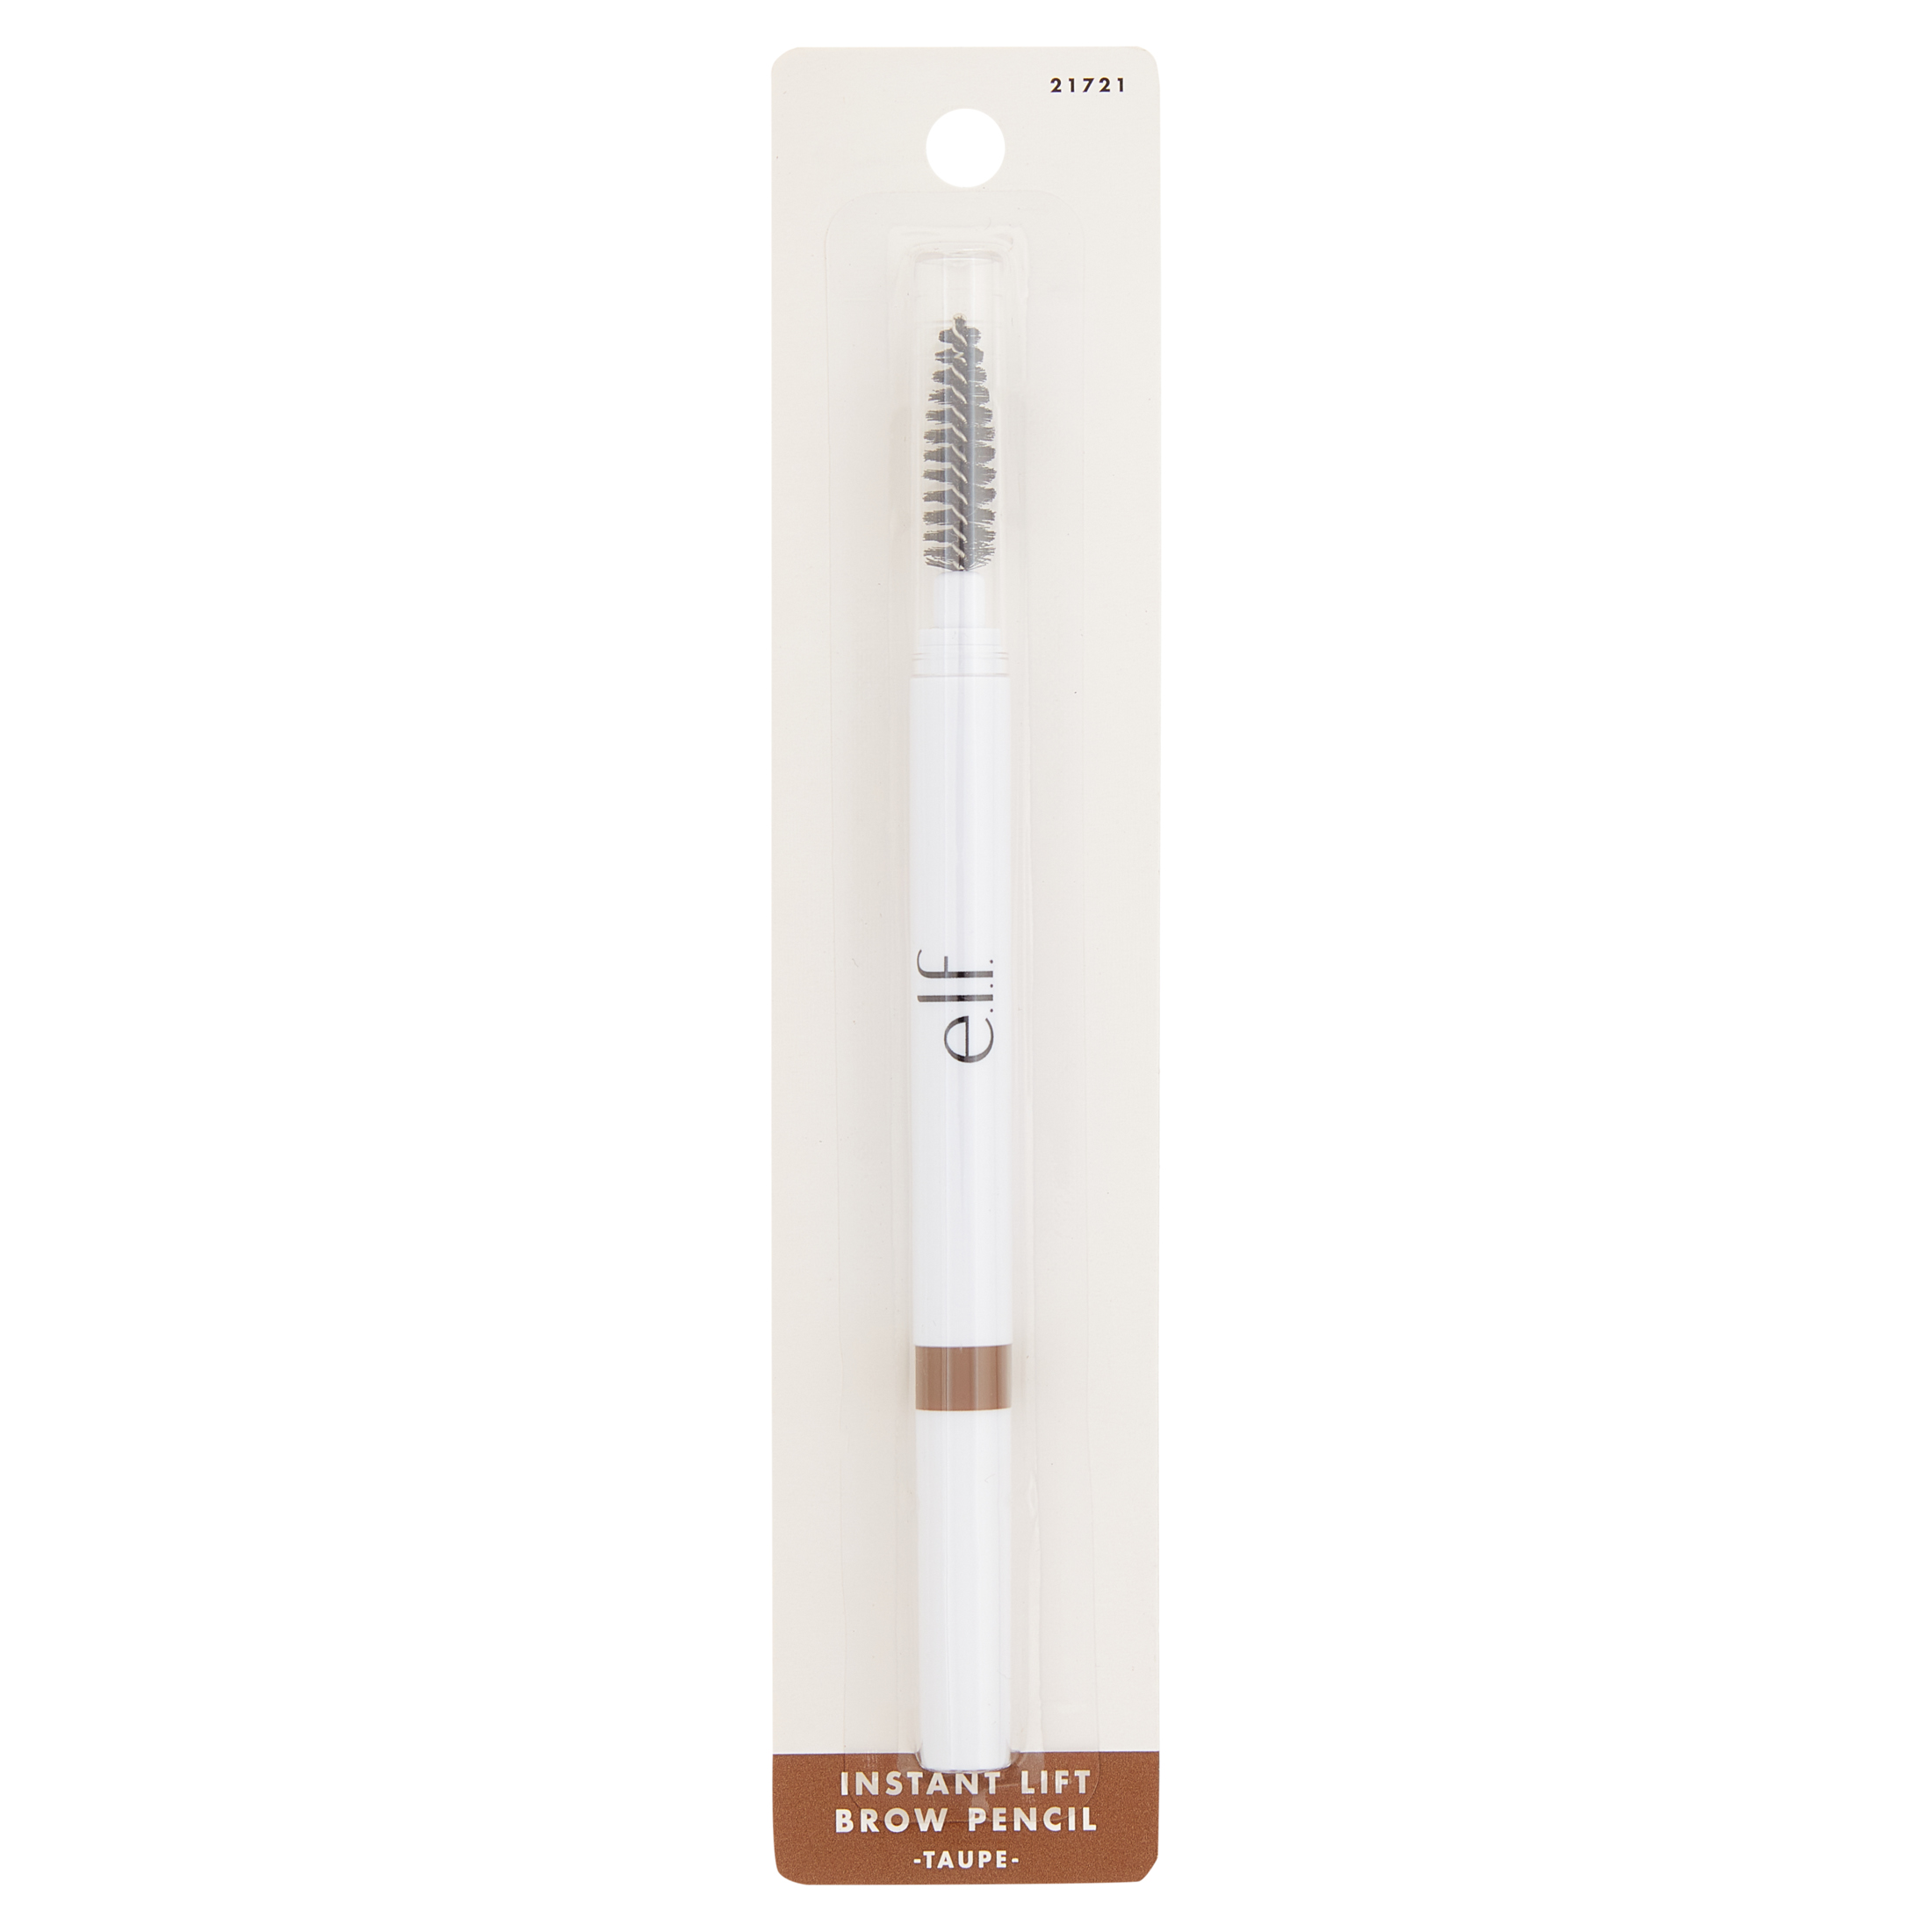 e.l.f. Instant Lift Brow Pencil, Neutral Brown - image 7 of 9